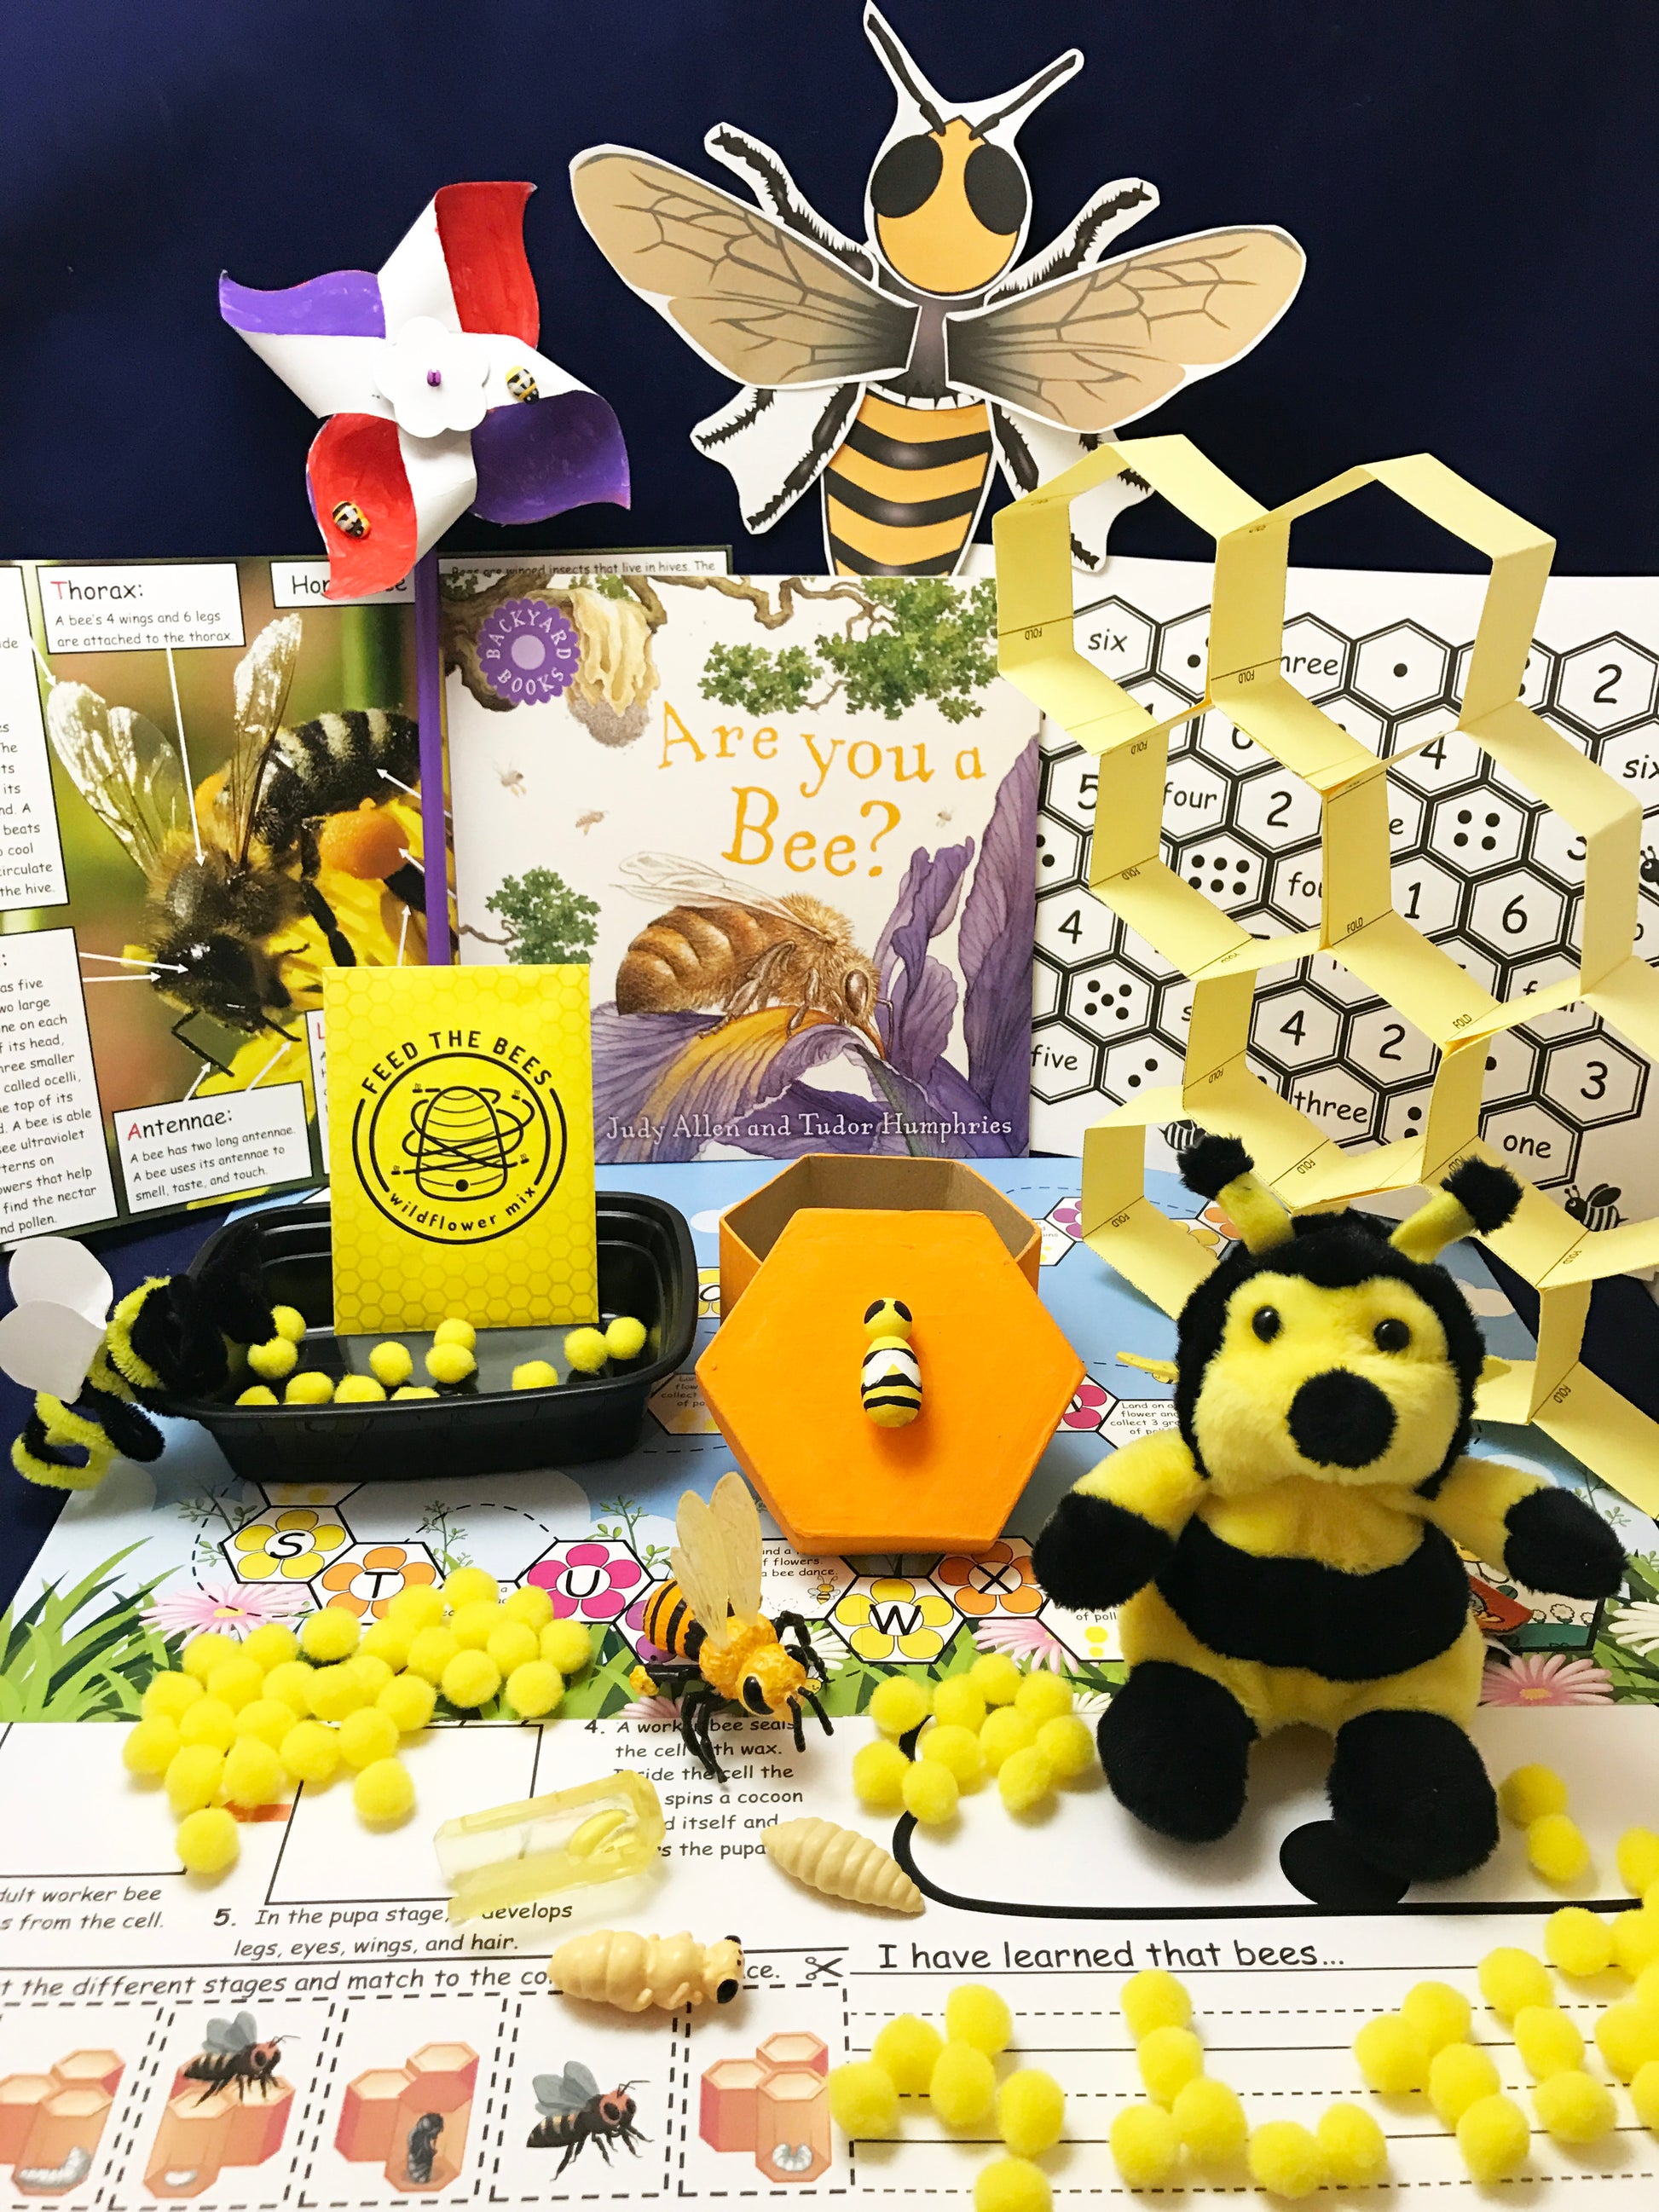 STEAM activities inspired by the children's book Are you a bee?